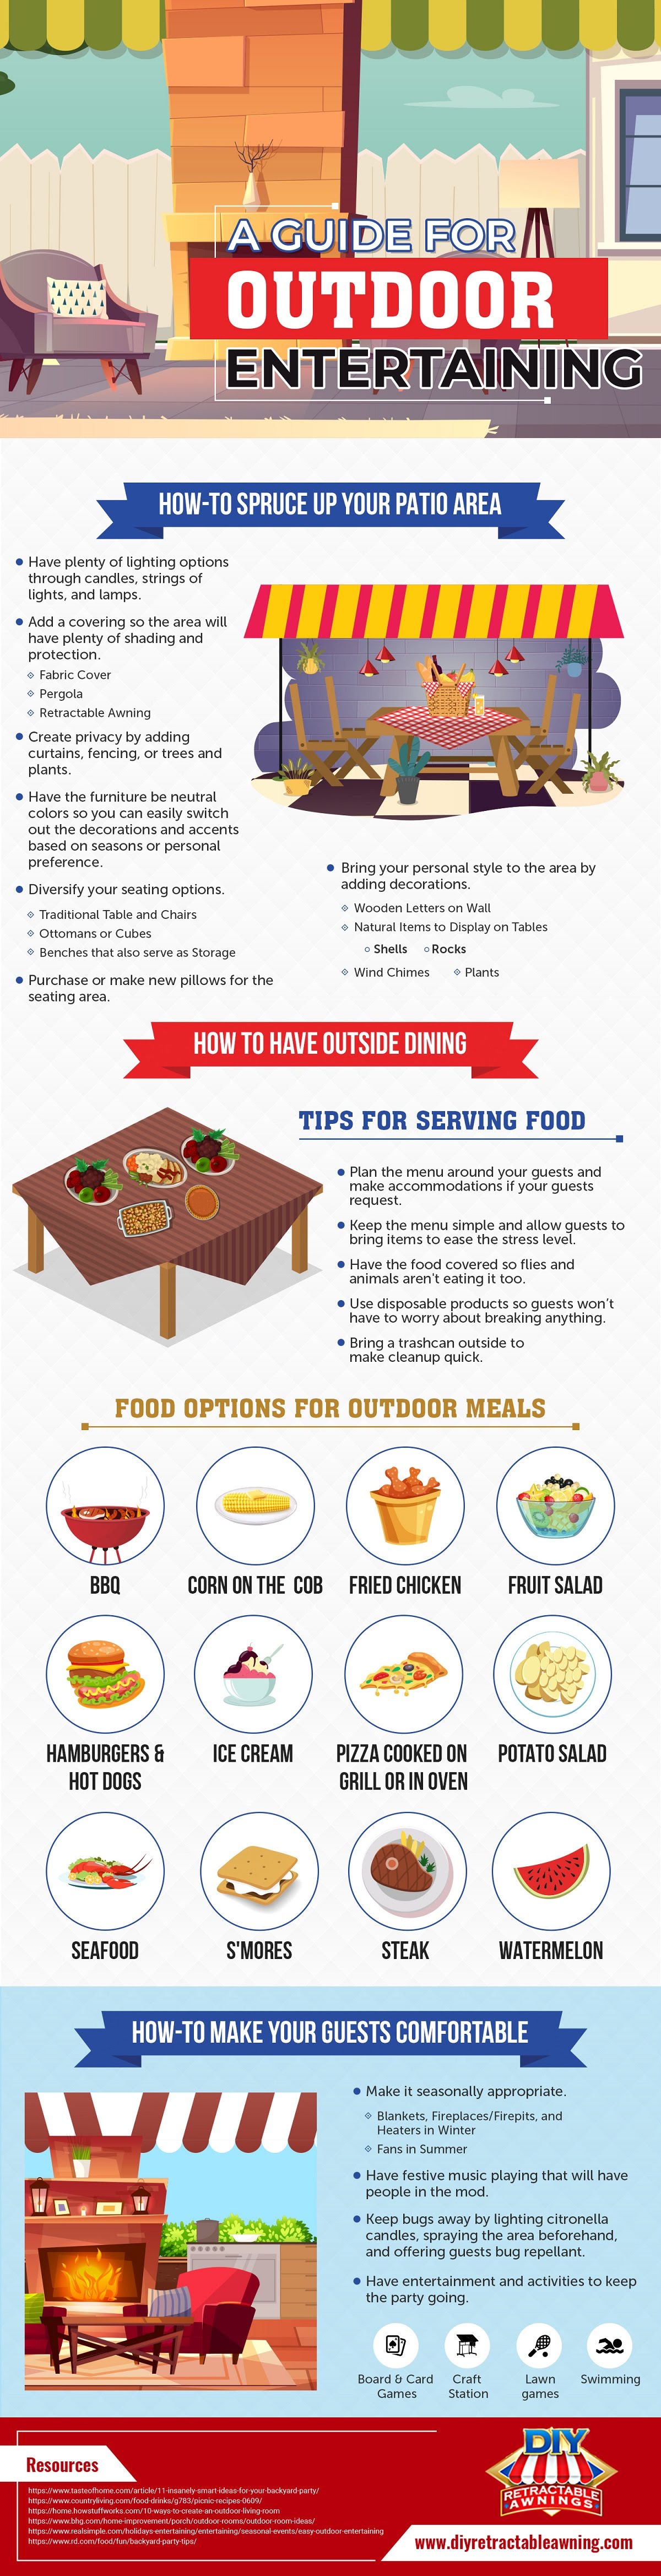 A Guide For Outdoor Entertaining #infographic